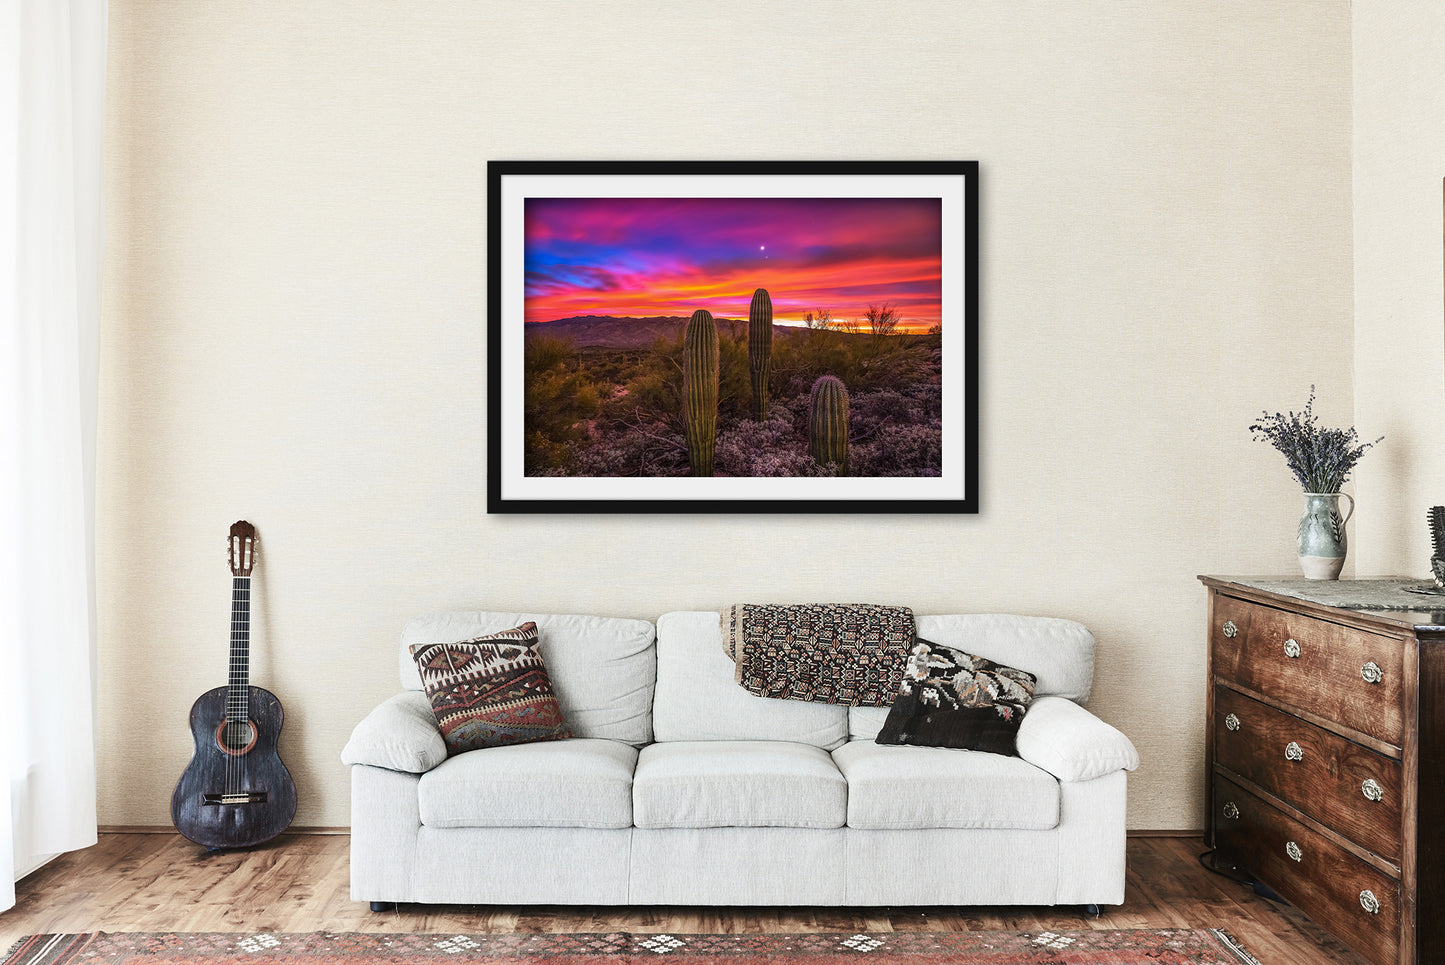 Southwestern Framed and Matted Print - Picture of Saguaro Cactus Under Venus and Jupiter at Sunrise in Sonoran Desert in Arizona Wall Art